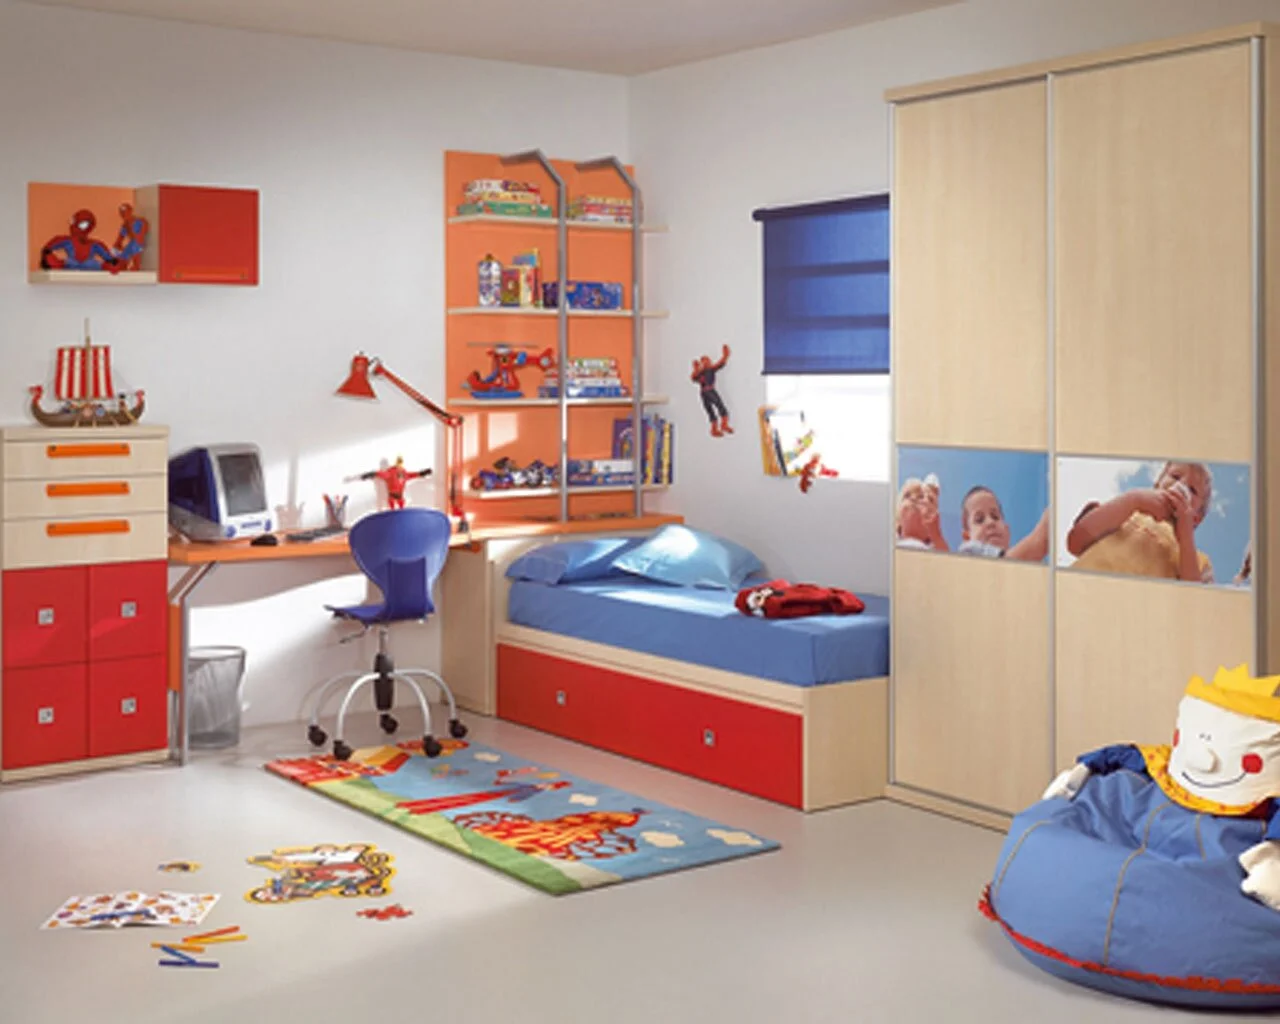 Cheerful Kids Room Decoration Red Storages Animal Rug Creamy Board Blue Bedsheet Blue Pillow Blue Curtain Peach Color Cabinet Clown Seat Children Room Design Bedroom Cheerful And Happening Children R Inside Give The Best Decoration For Children’s Rooms With Best Children’s Room Design Ideas